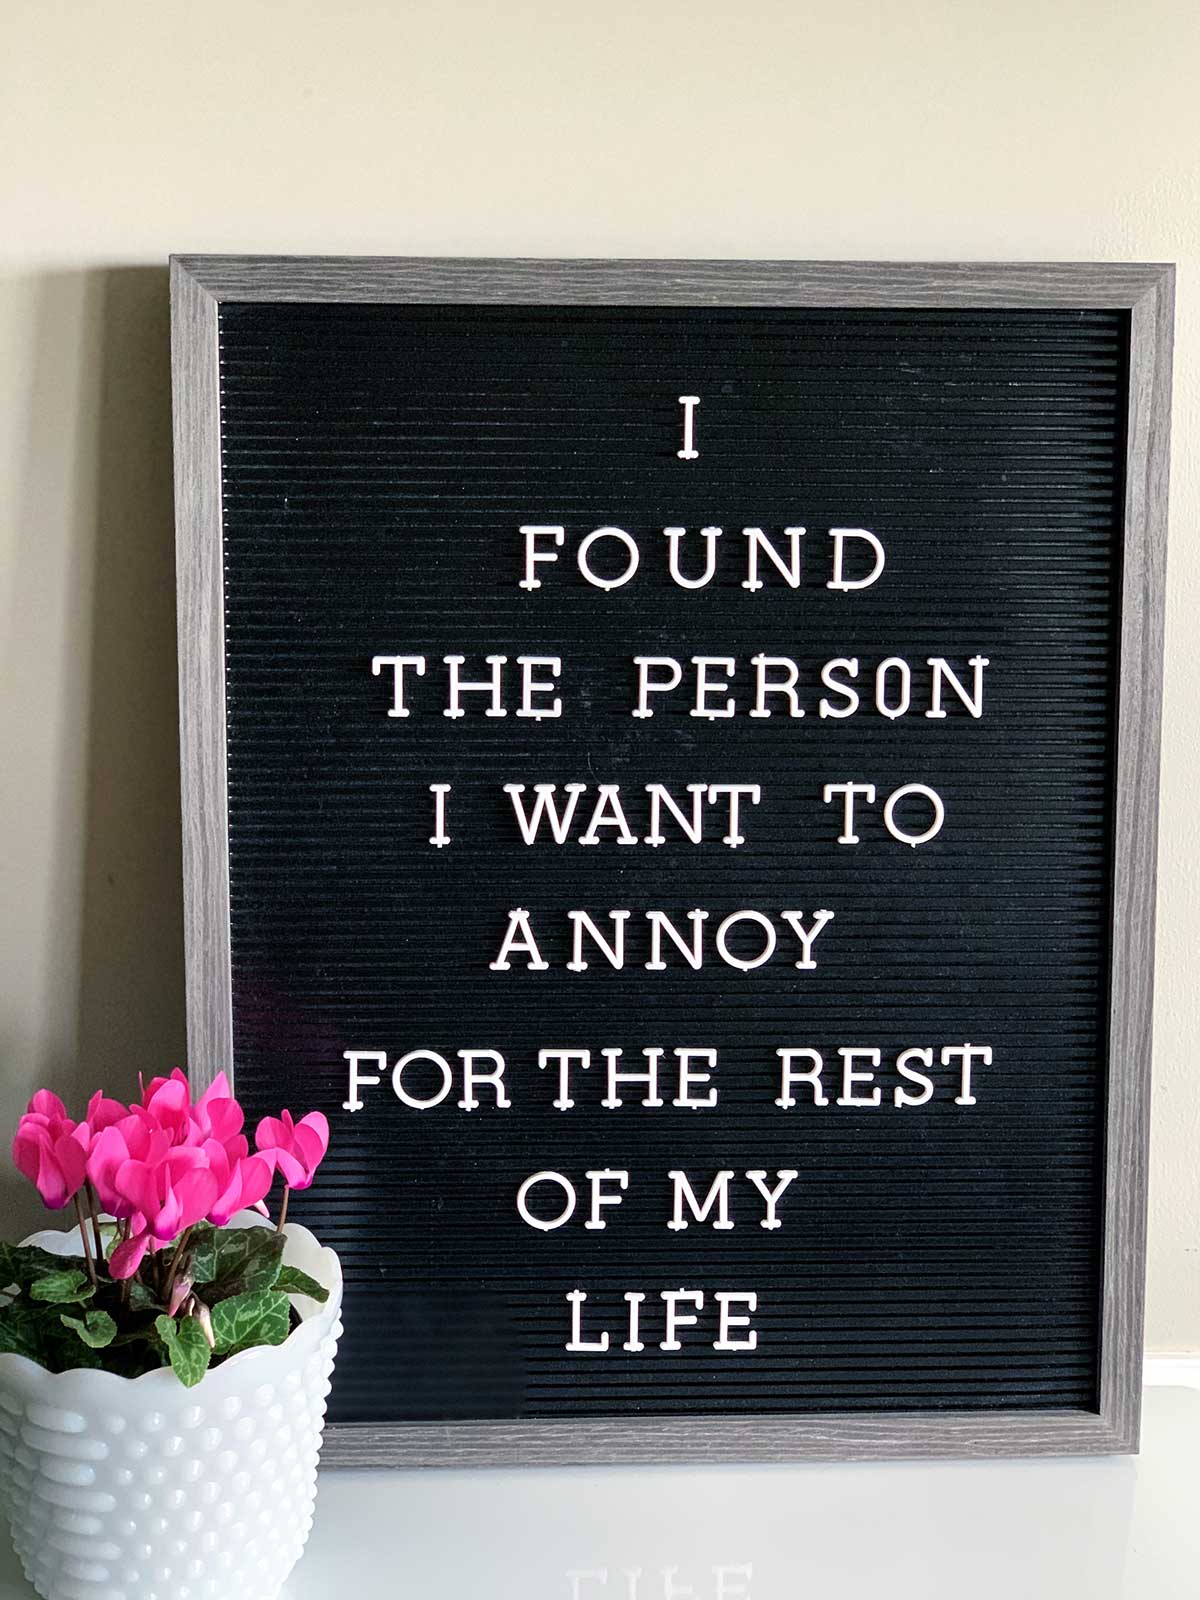 Letter board with the saying - I found the person I want to annoy for the rest of my life.